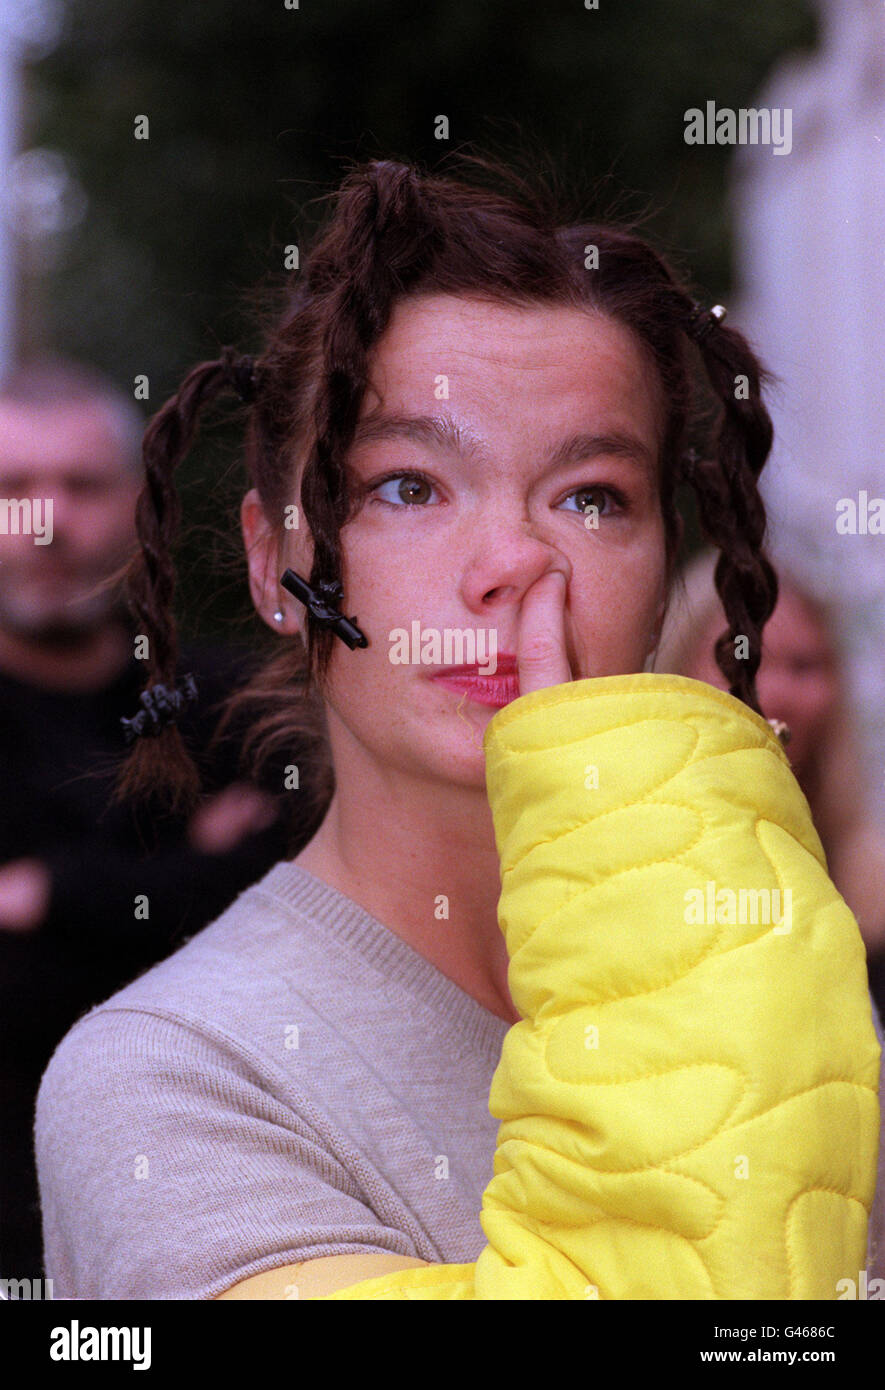 NEG NO 265396-3 : LONDON : ICELANDIC SINGER BJORK STICKS HER FINGER UP HER NOSE OUTSIDE HER HOME IN LONDON. PA NEWS PHOTO BY FIONA HANSON. Stock Photo